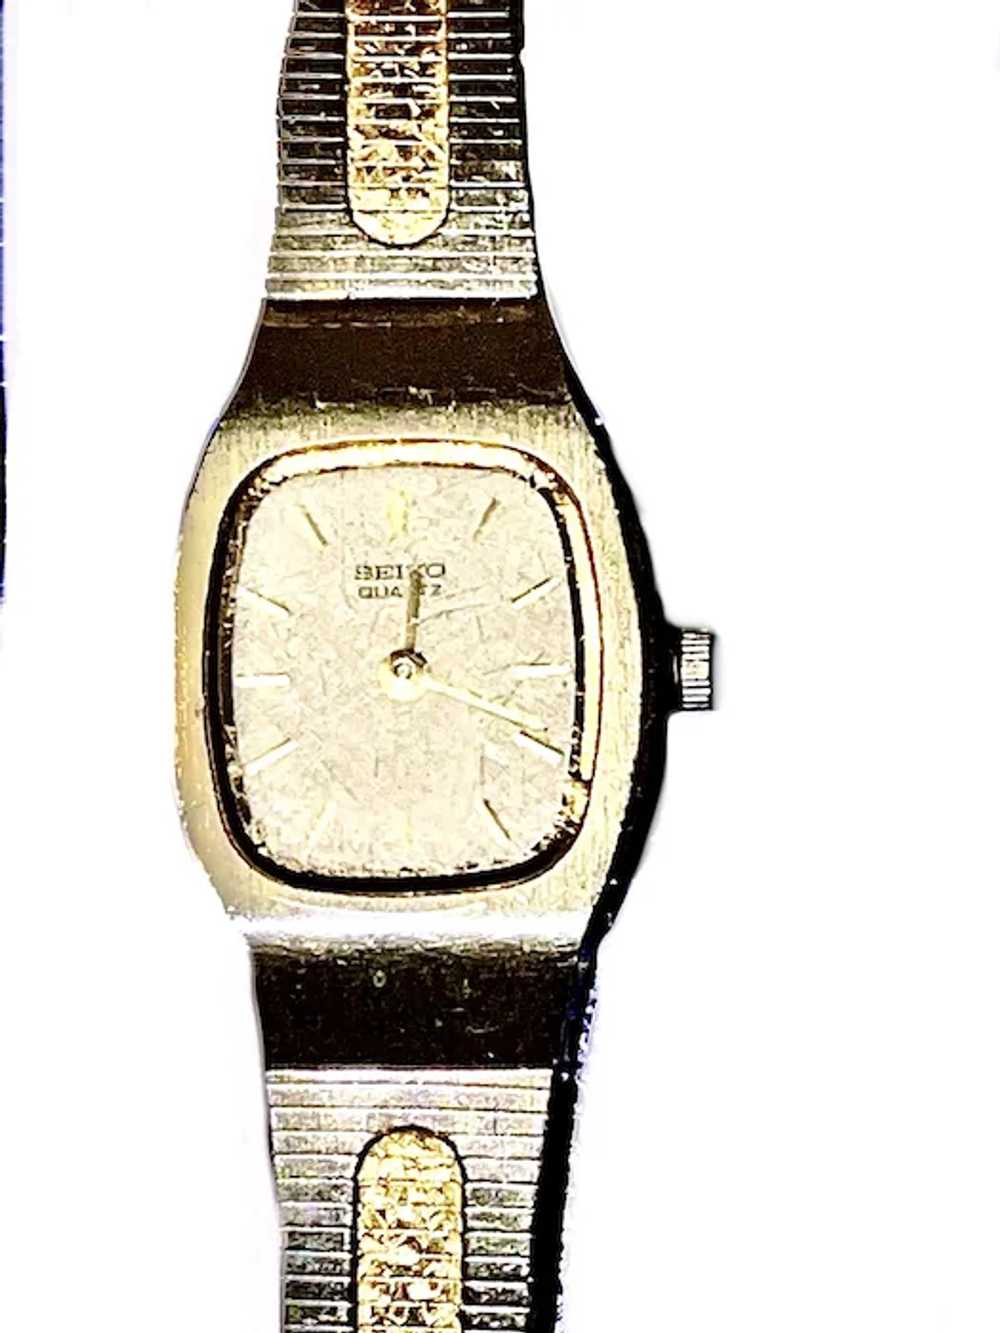 Seiko Two Toned Etched Design Wrist Watch - image 2